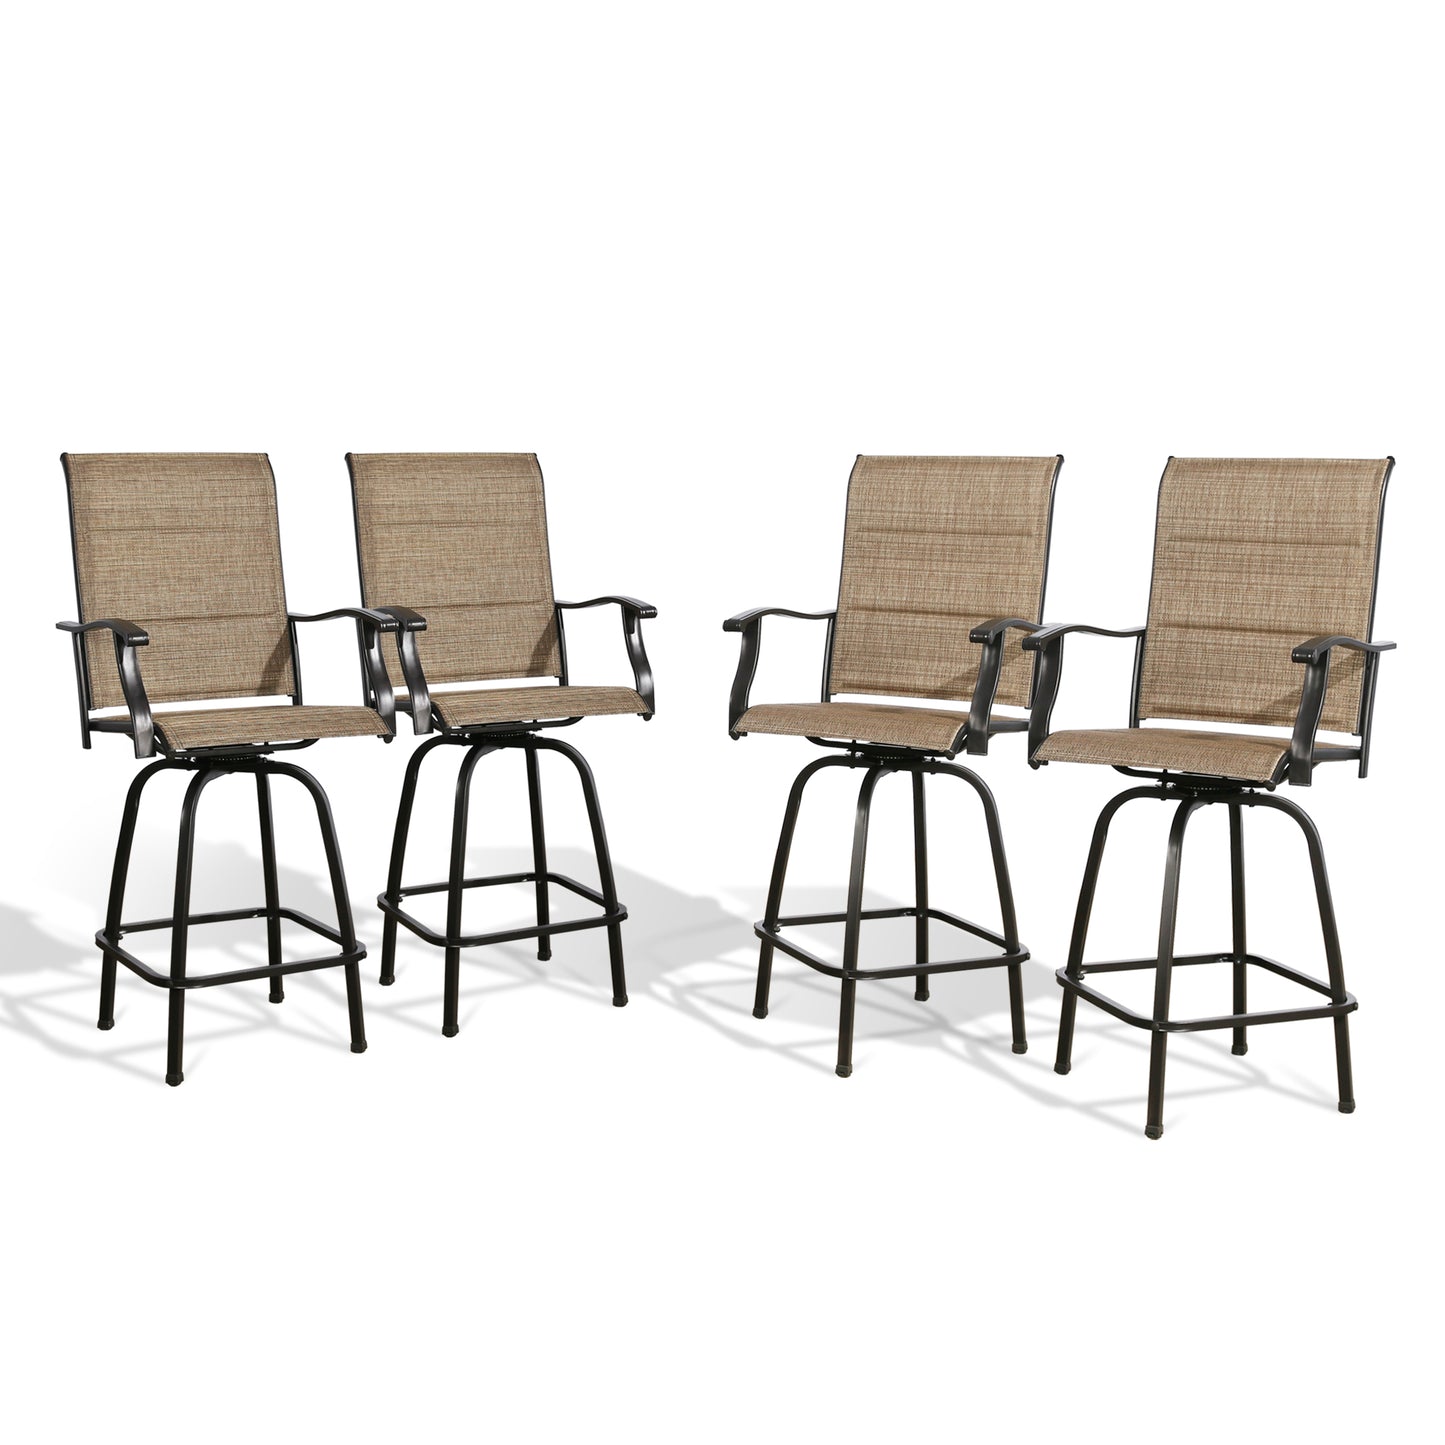 4-Piece Padded Outdoor Swivel Bar Stools Textilene Patio Seating Height Bar Chairs with Quick Dry Foam and Armrest